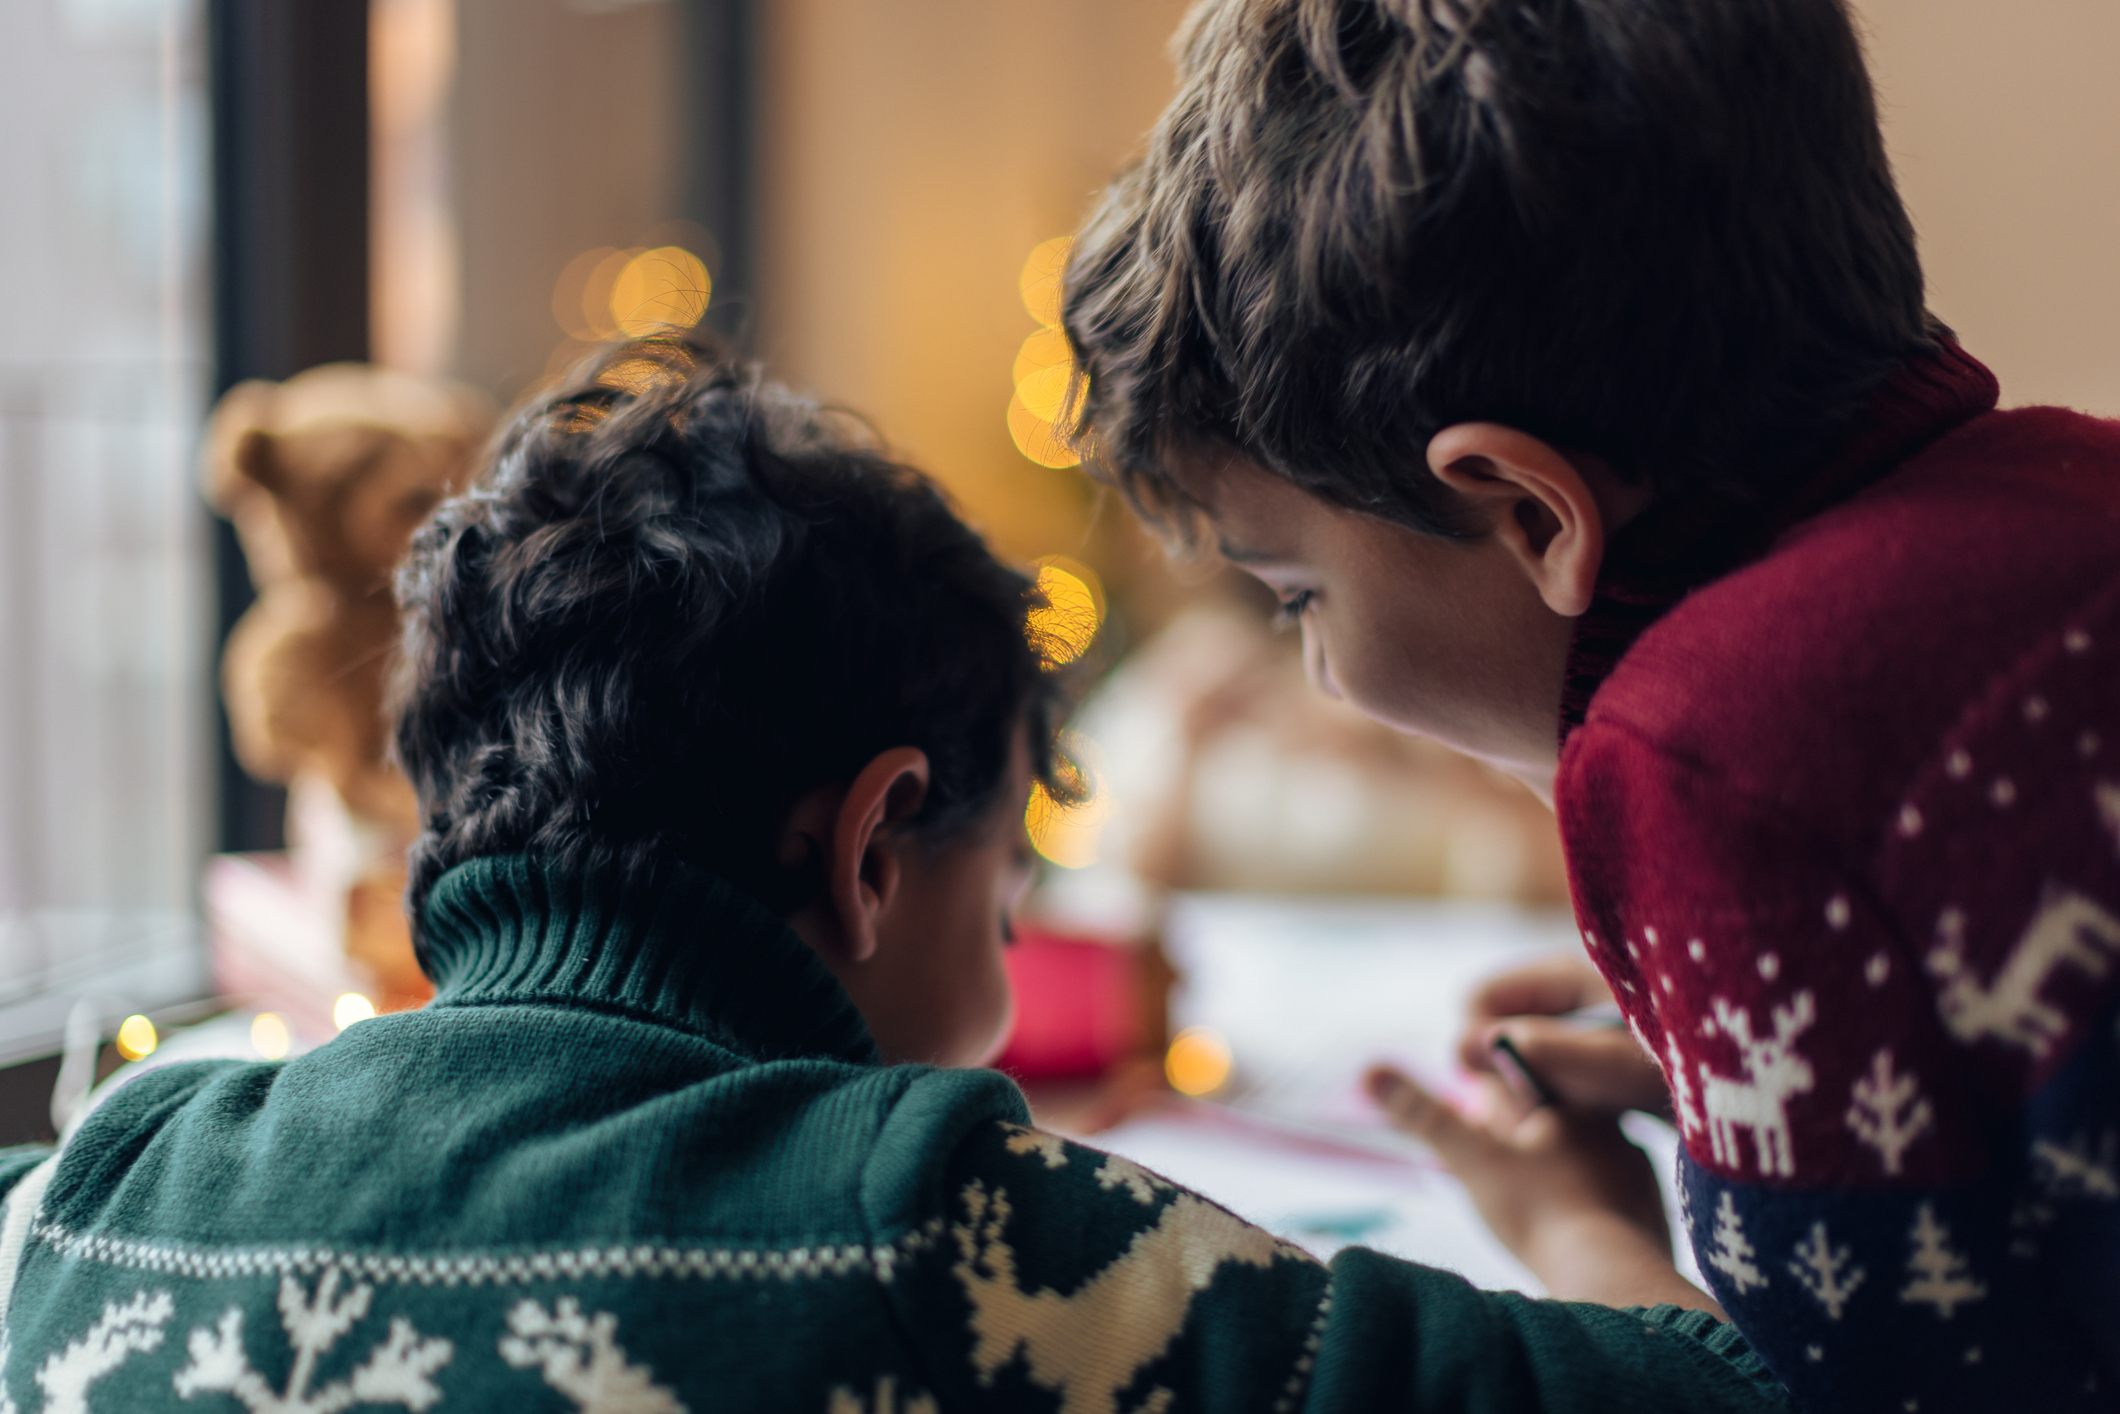 Two boys in Christmas jumpers completing homework